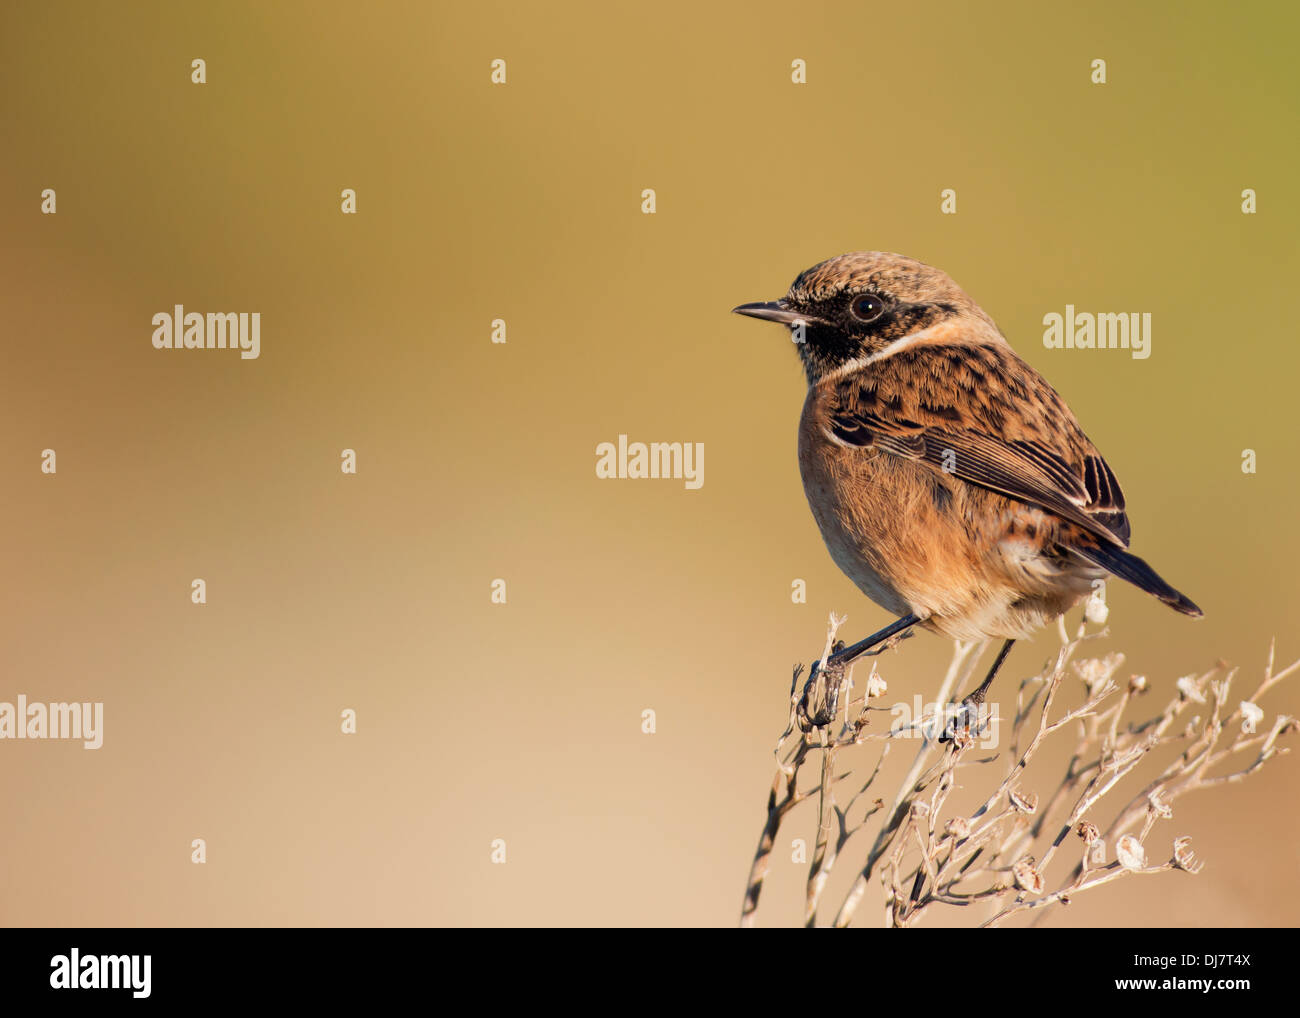 Male Stonechat Saxicola torquata in Autumn plumage perched in low evening sunlight Stock Photo